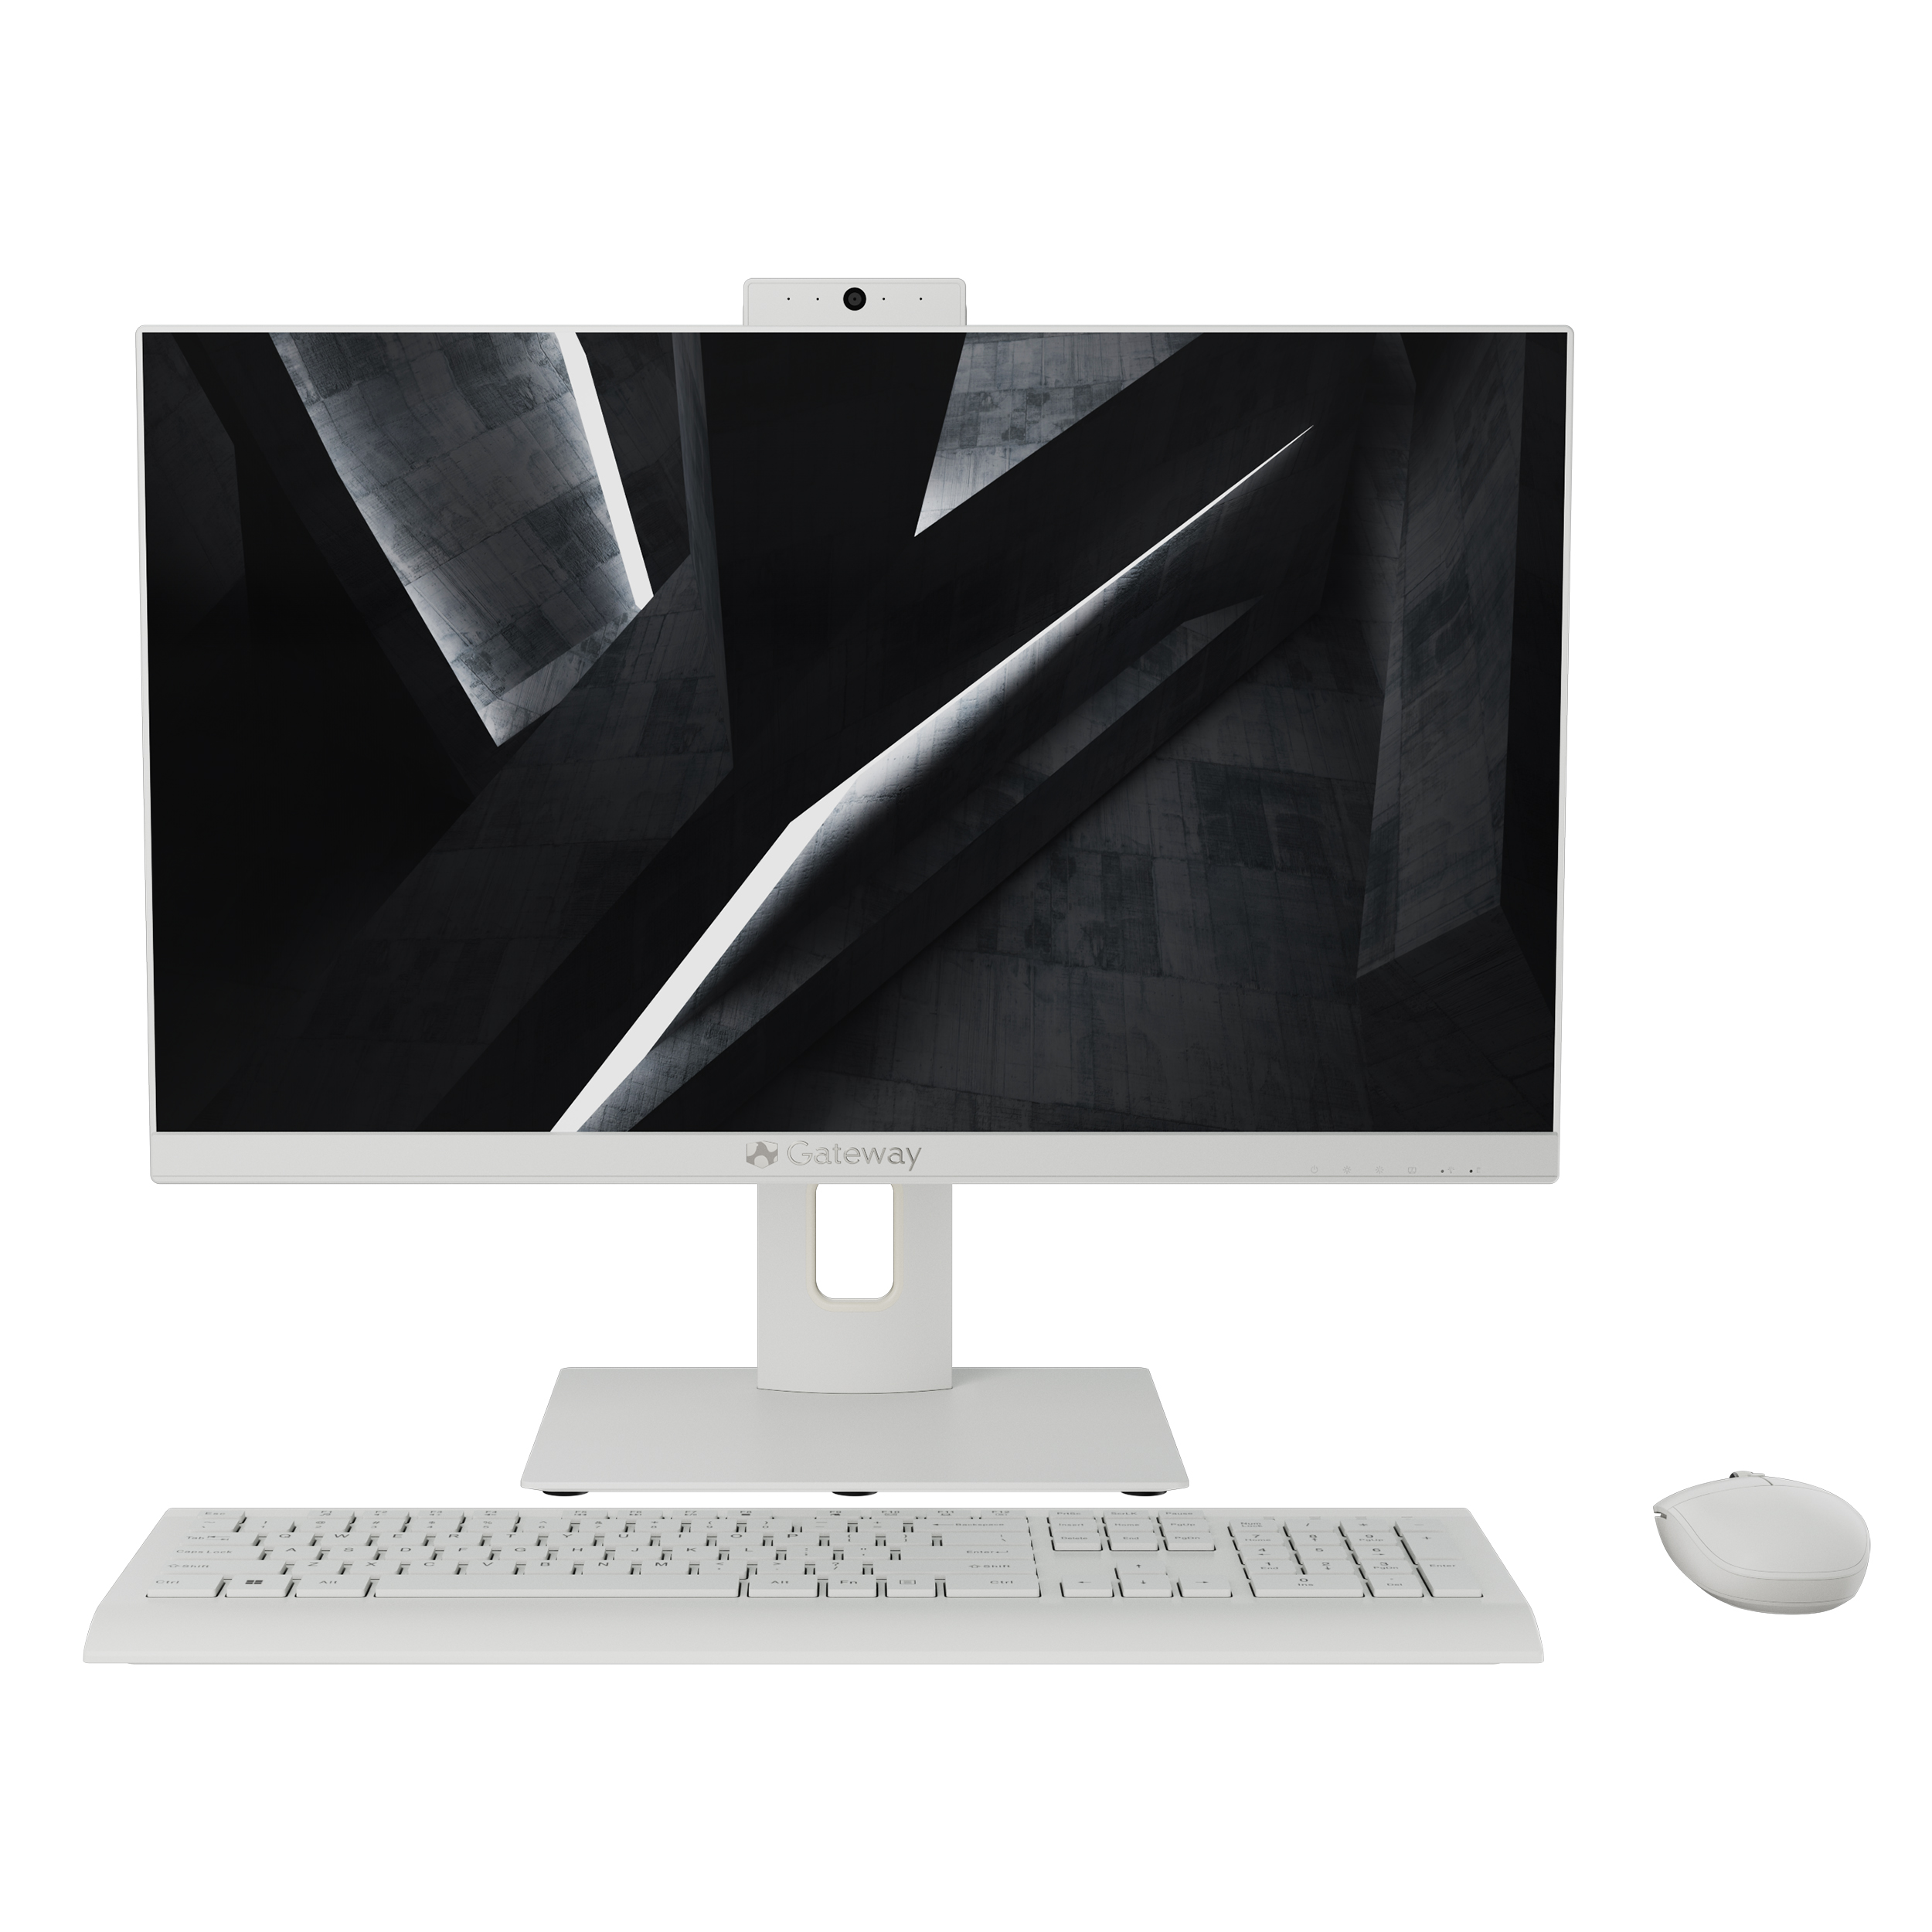 Gateway 23.8" All-in-one Desktop, Fully Adjustable Stand, FHD, Intel Pentium J5040, 4GB RAM, 128GB SSD, 2MP Camera, Windows 11, Microsoft 365 Personal 1-Year Included, Mouse & Keyboard Included, White - image 3 of 11